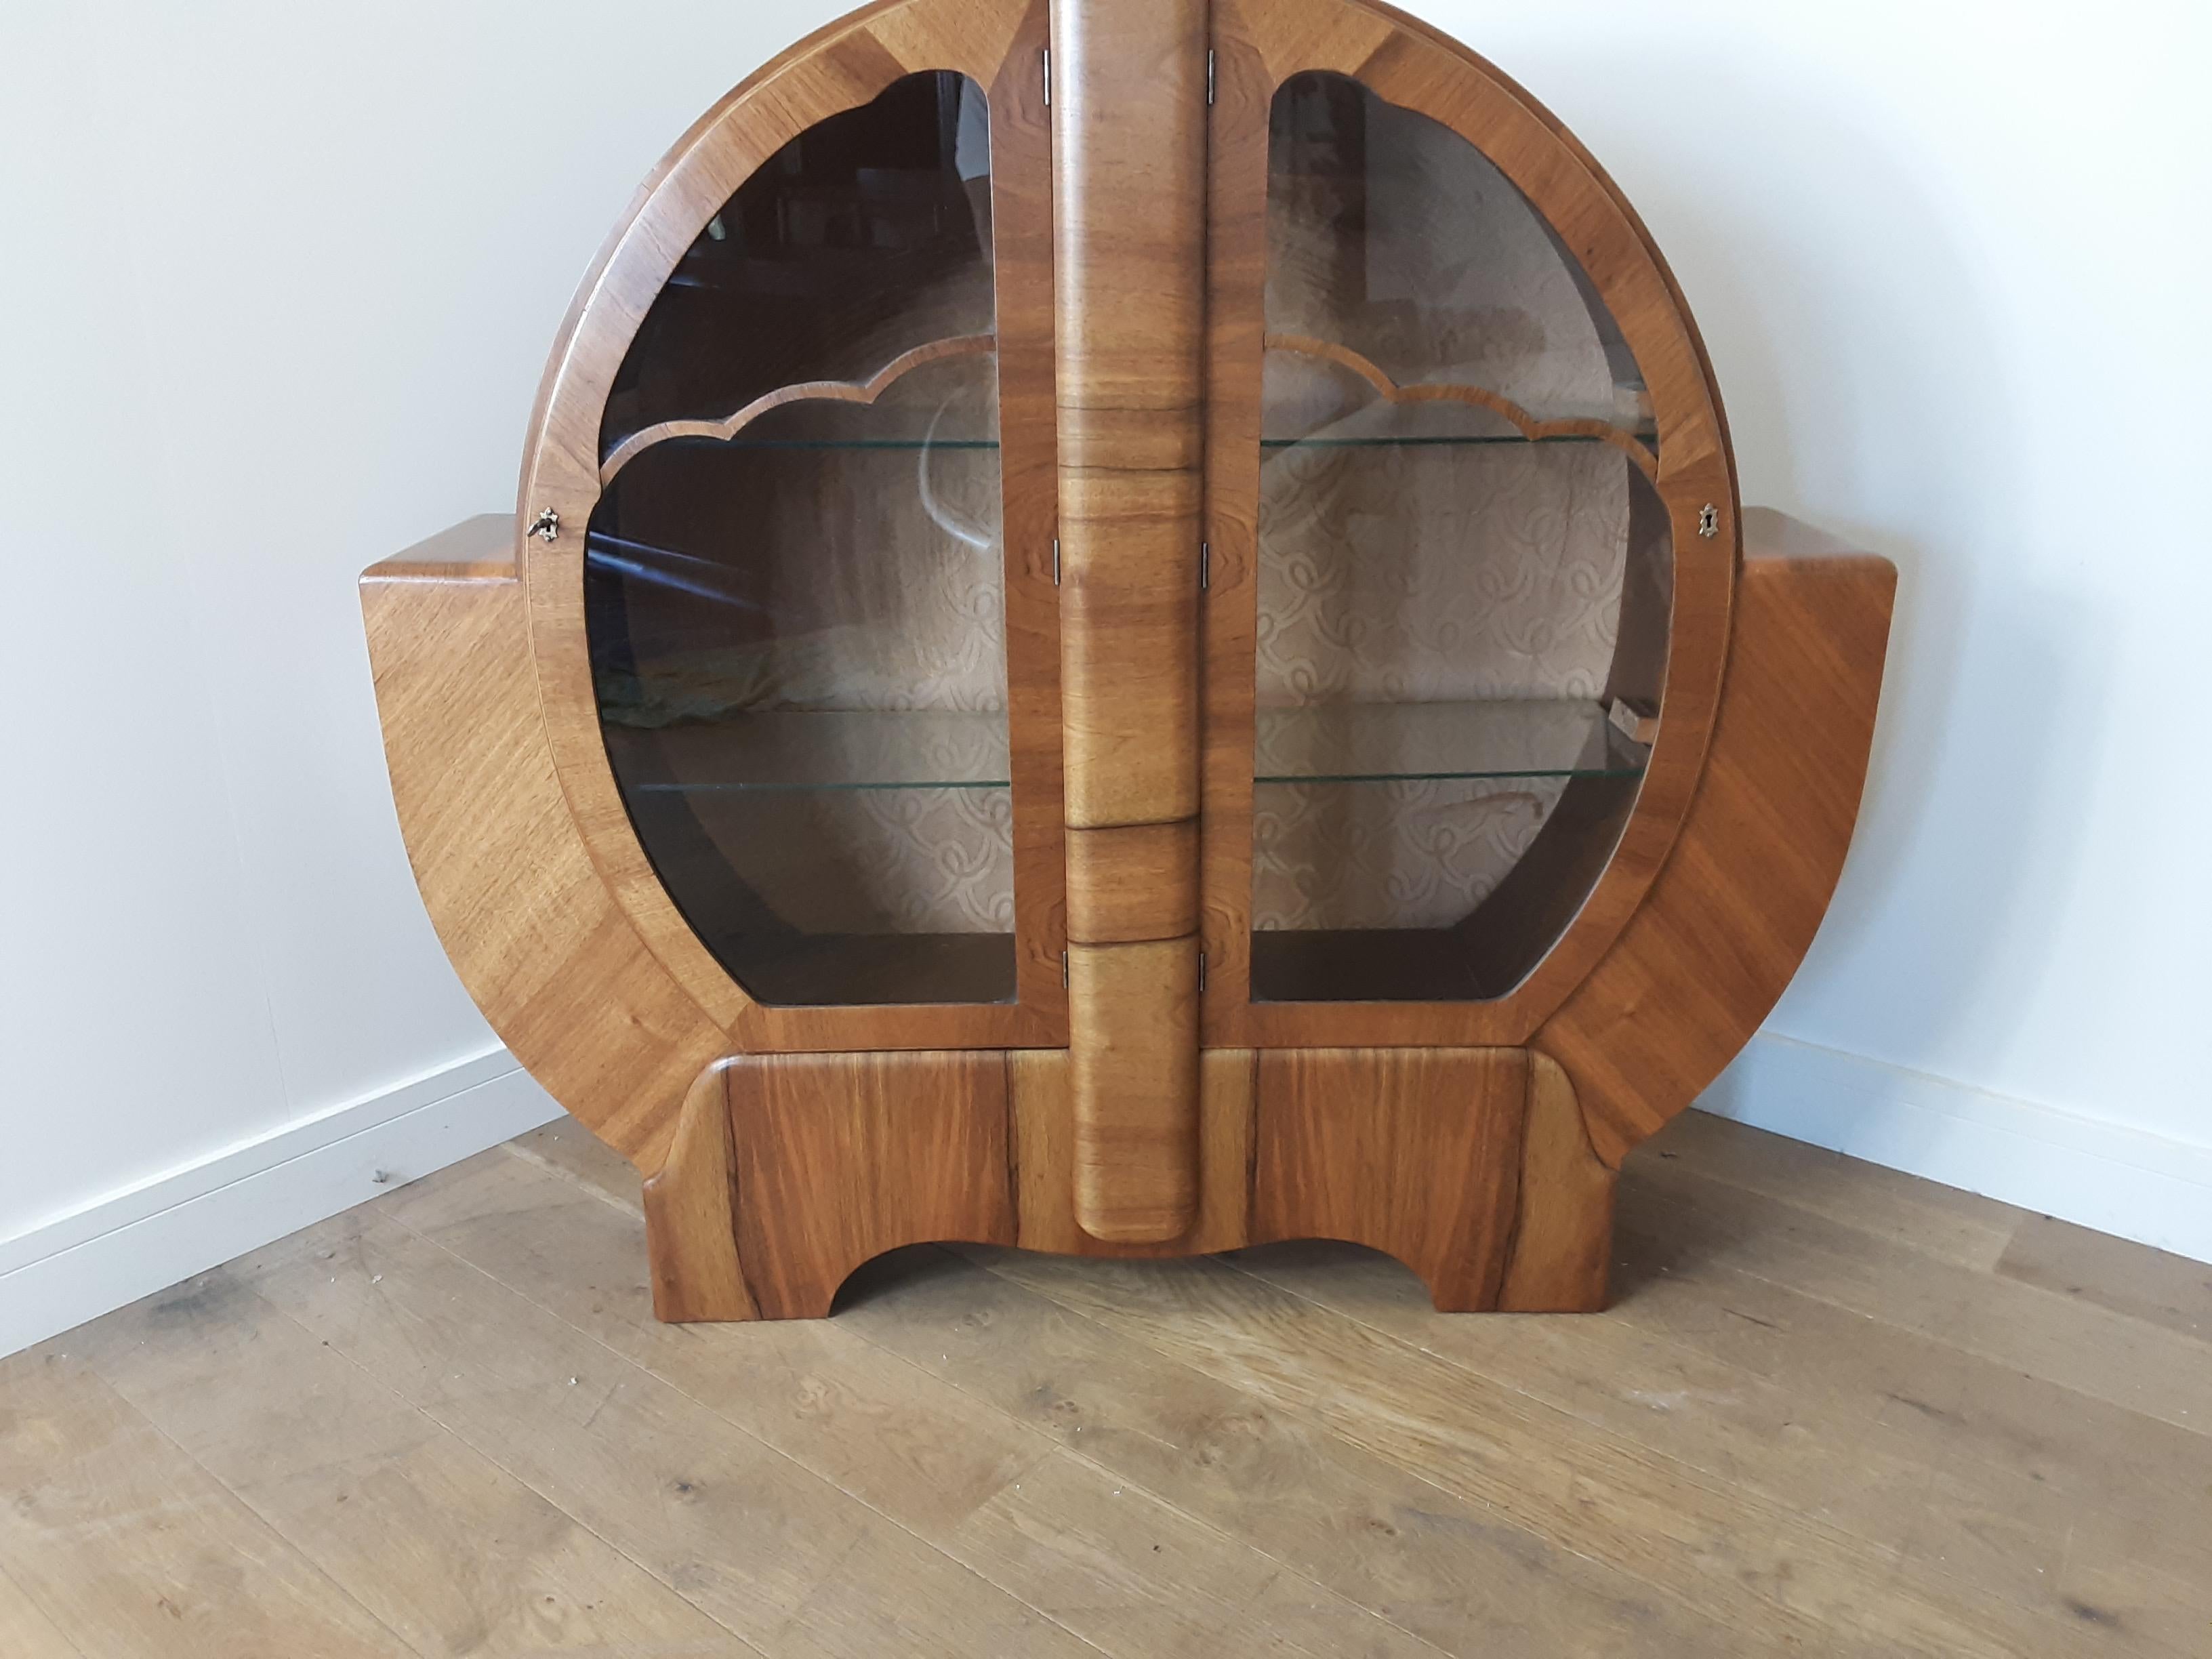 Art Deco display cabinet bookcase.
A circular shouldered cabinet in a beautiful light walnut with clod design fretwork to the glazed doors.
Measures: 127 cm H, 135 cm W, 31 cm D
British, circa 1930
this cabinet has been professionally re